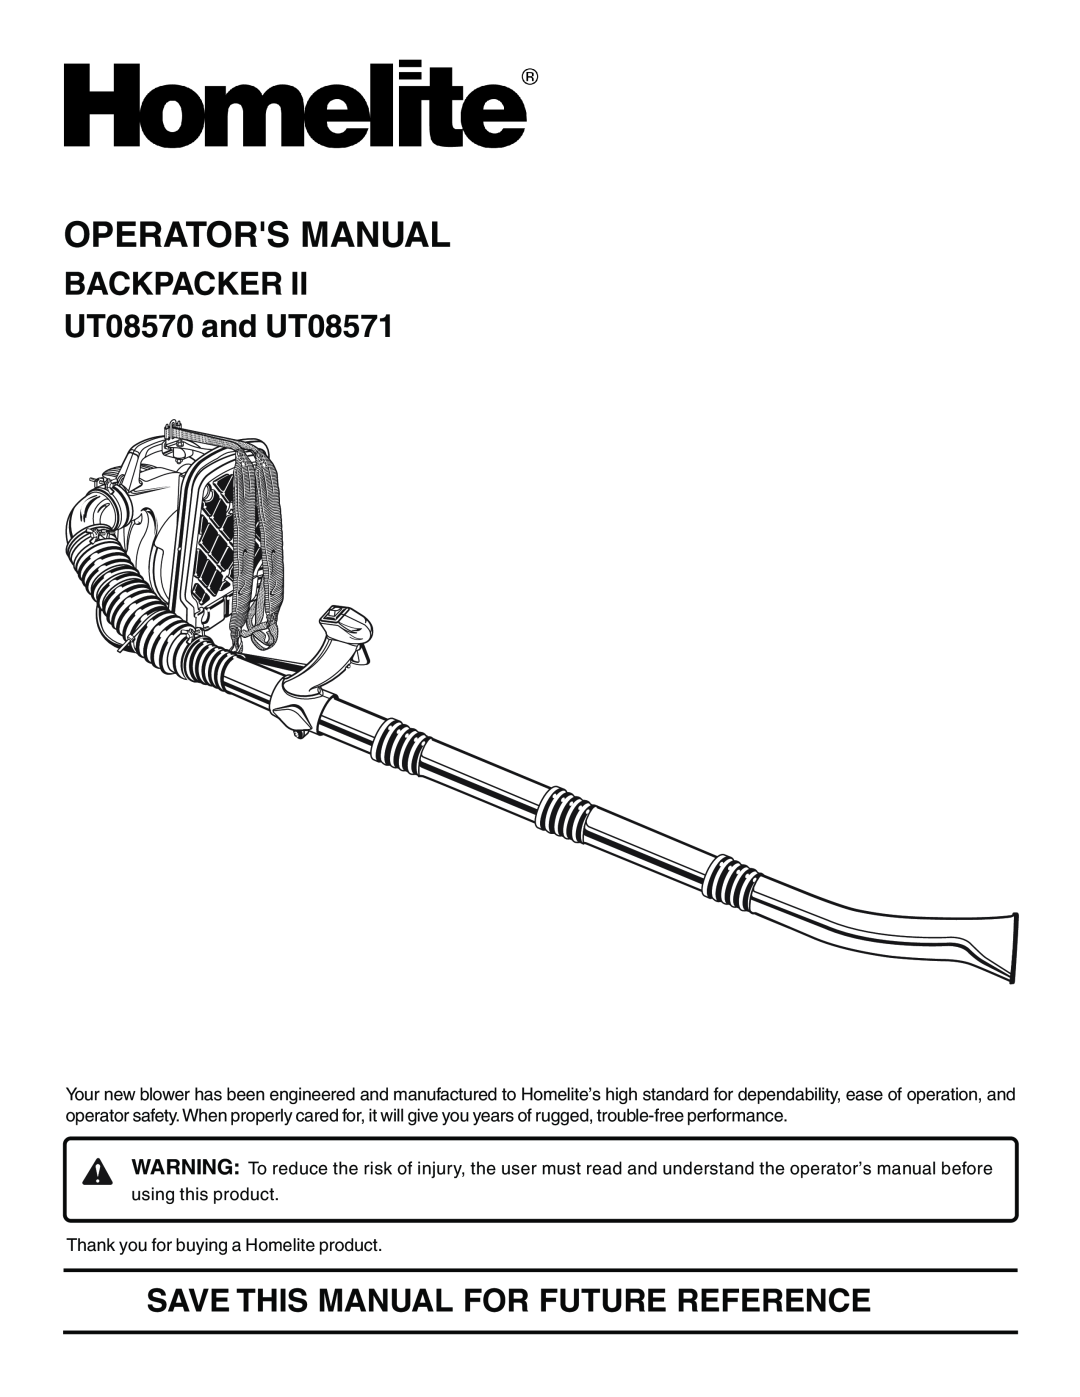 Homelite manual Operators Manual, BACKPACKER UT08570 and UT08571, Save This Manual For Future Reference 